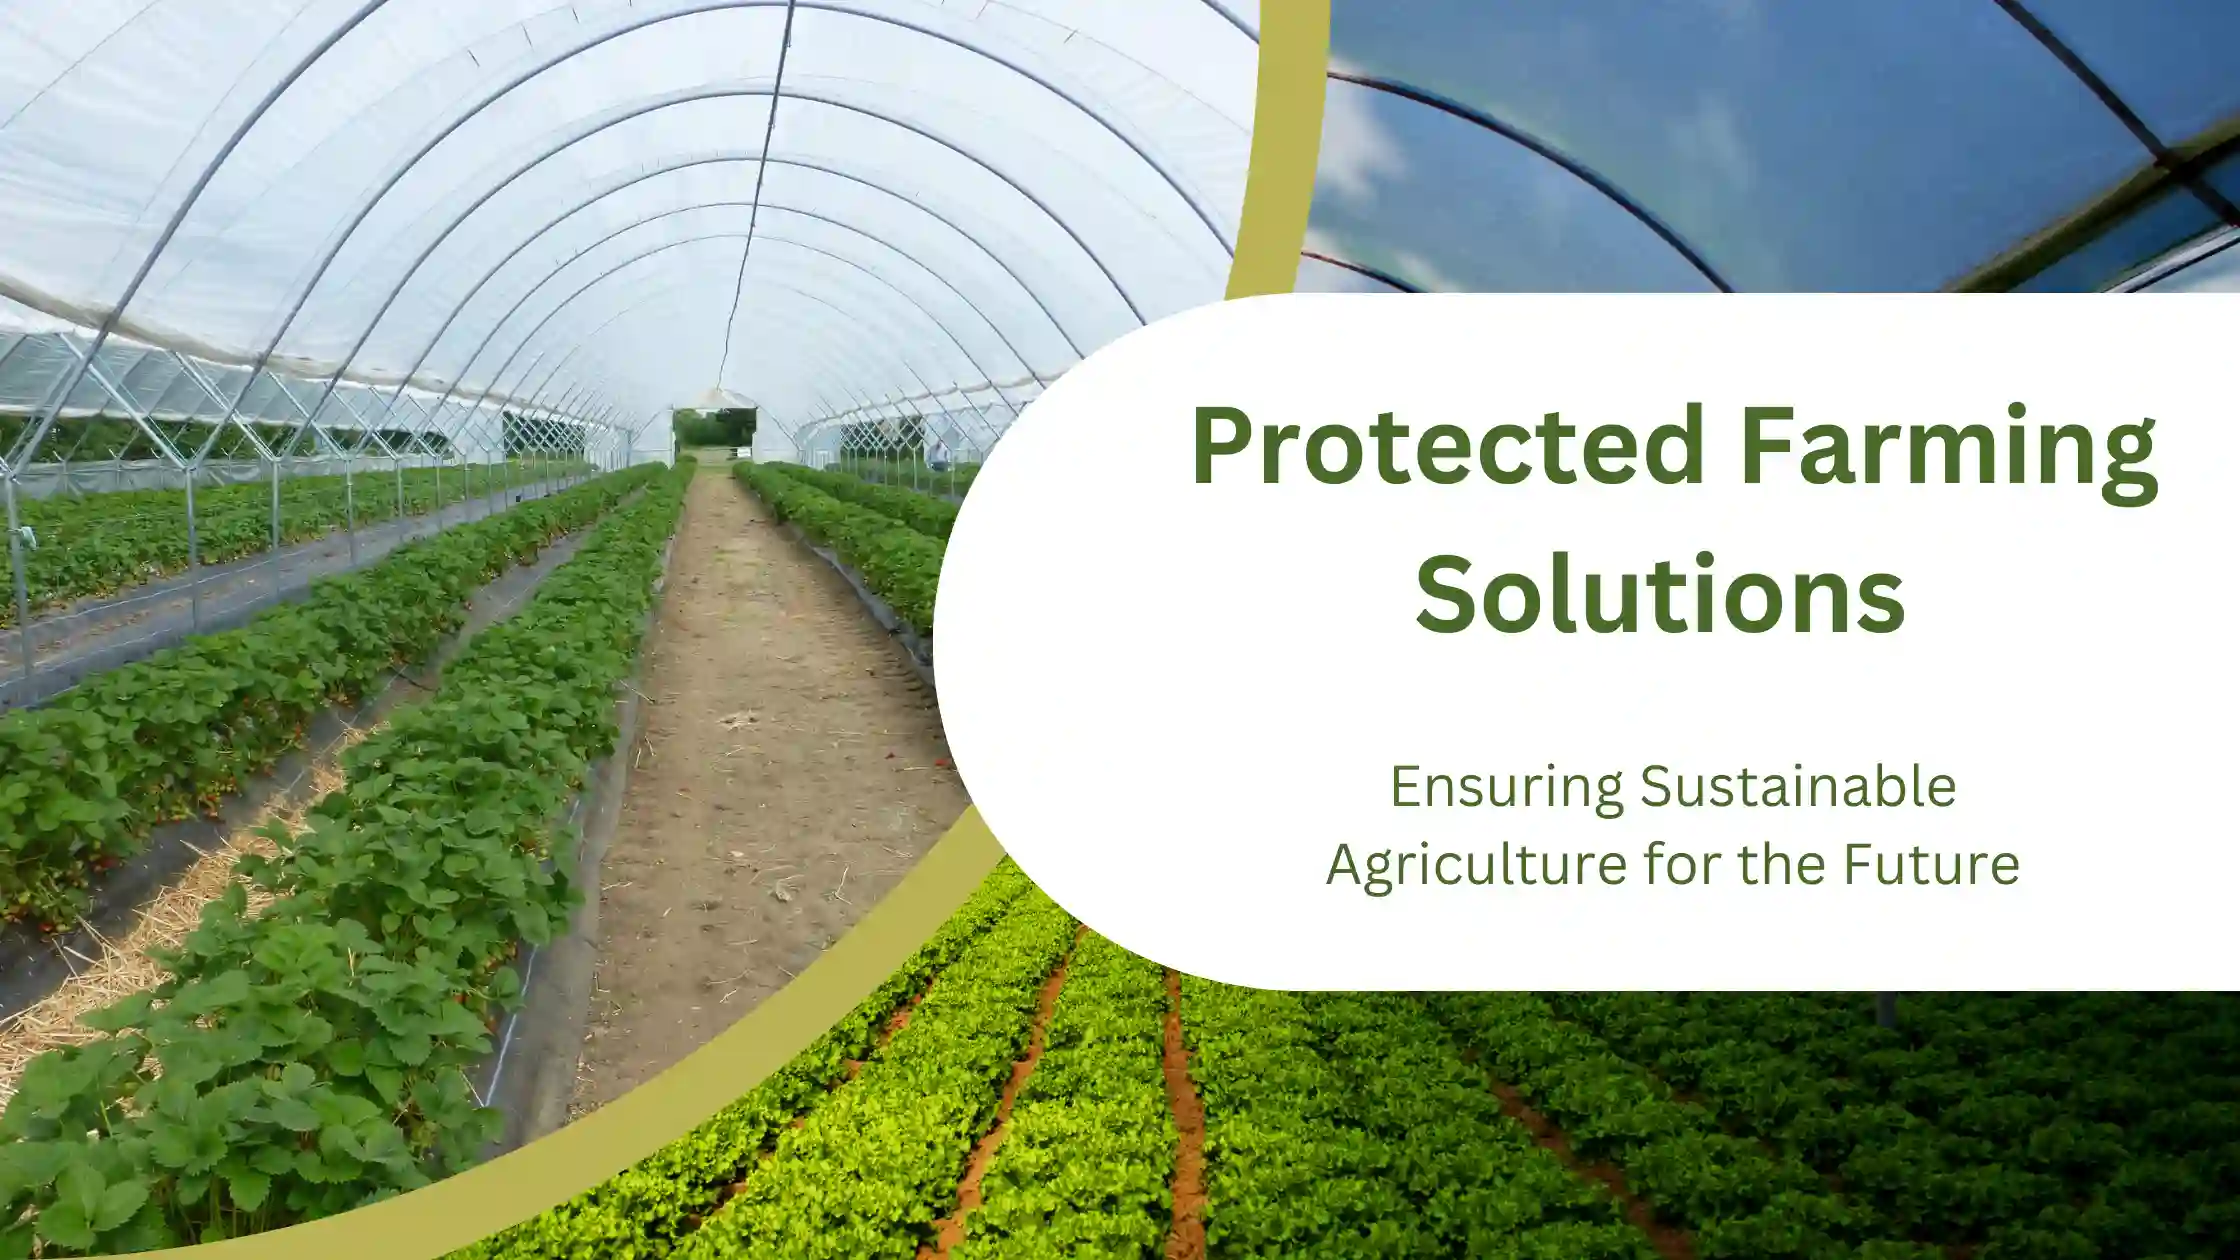 Protected Farming Solutions